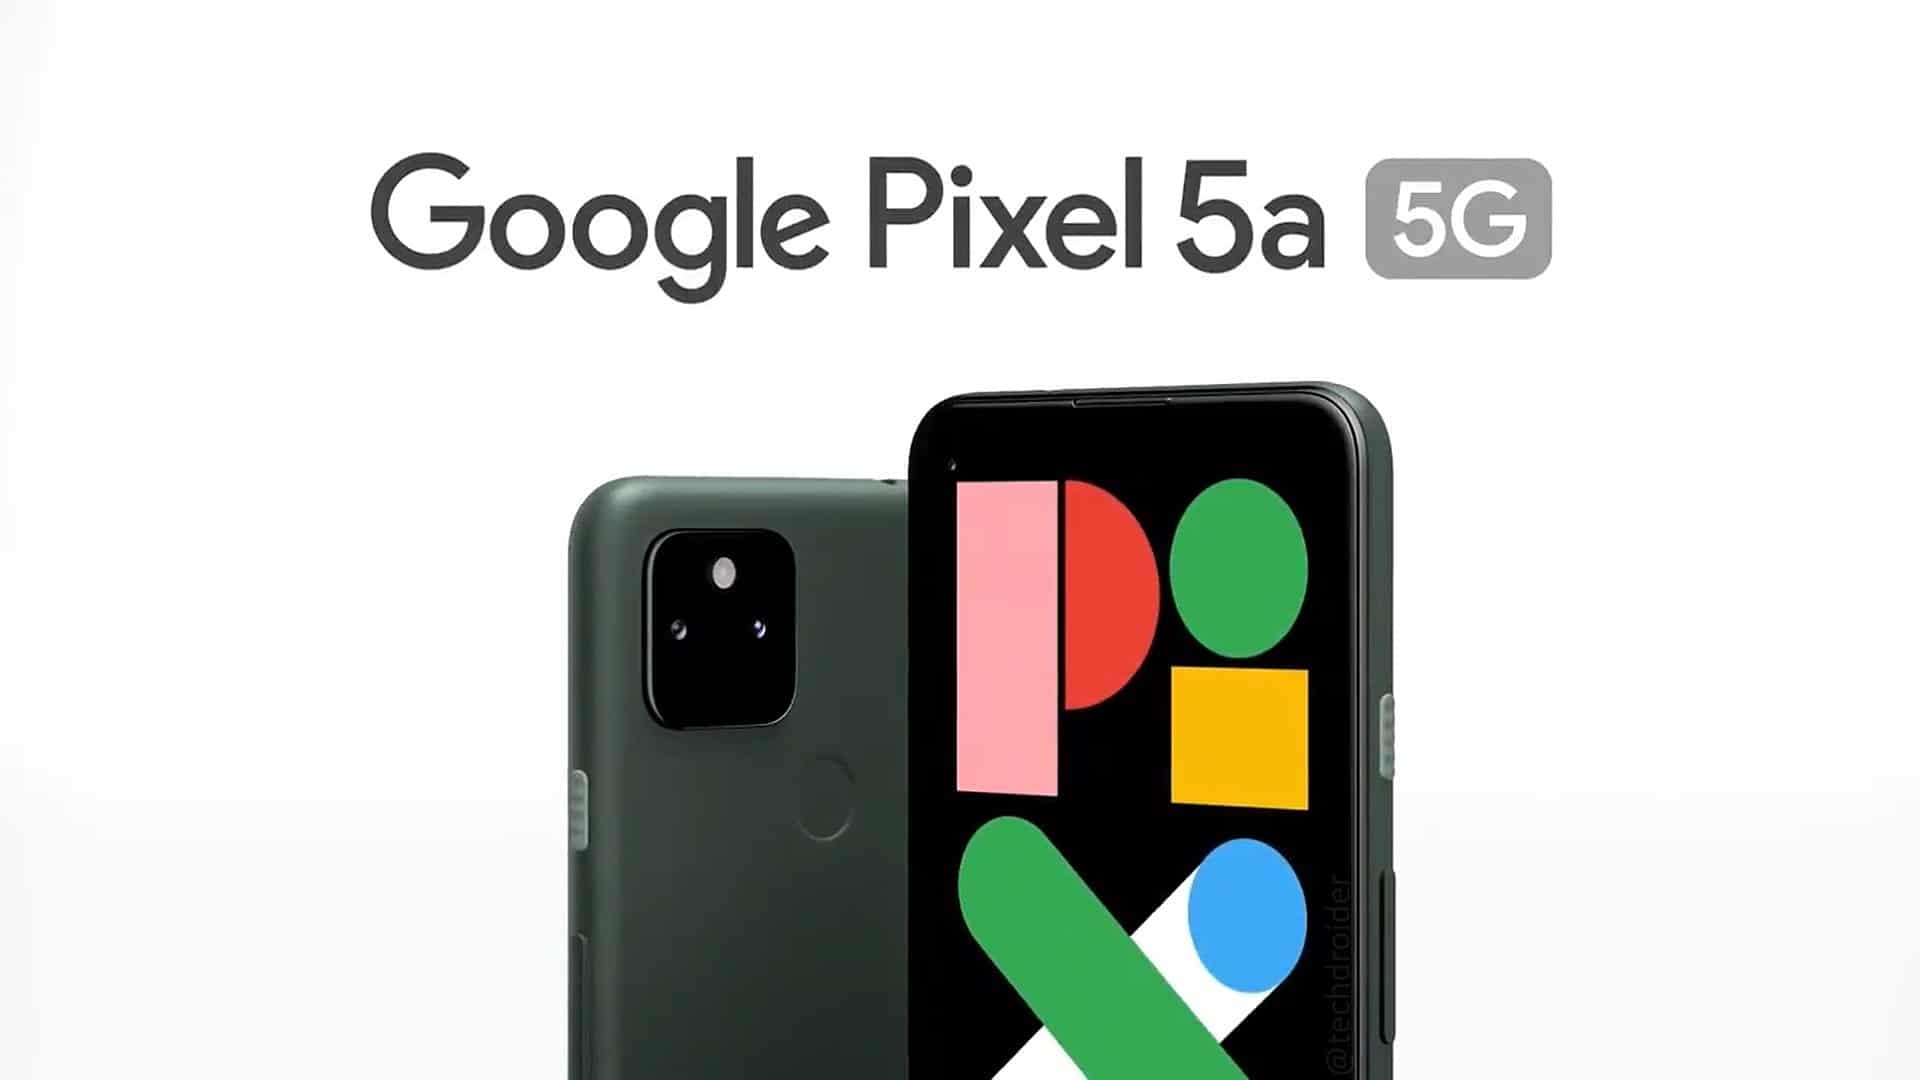 Google Announces the Pixel 5a to Take on the iPhone SE and iPhone 12 mini